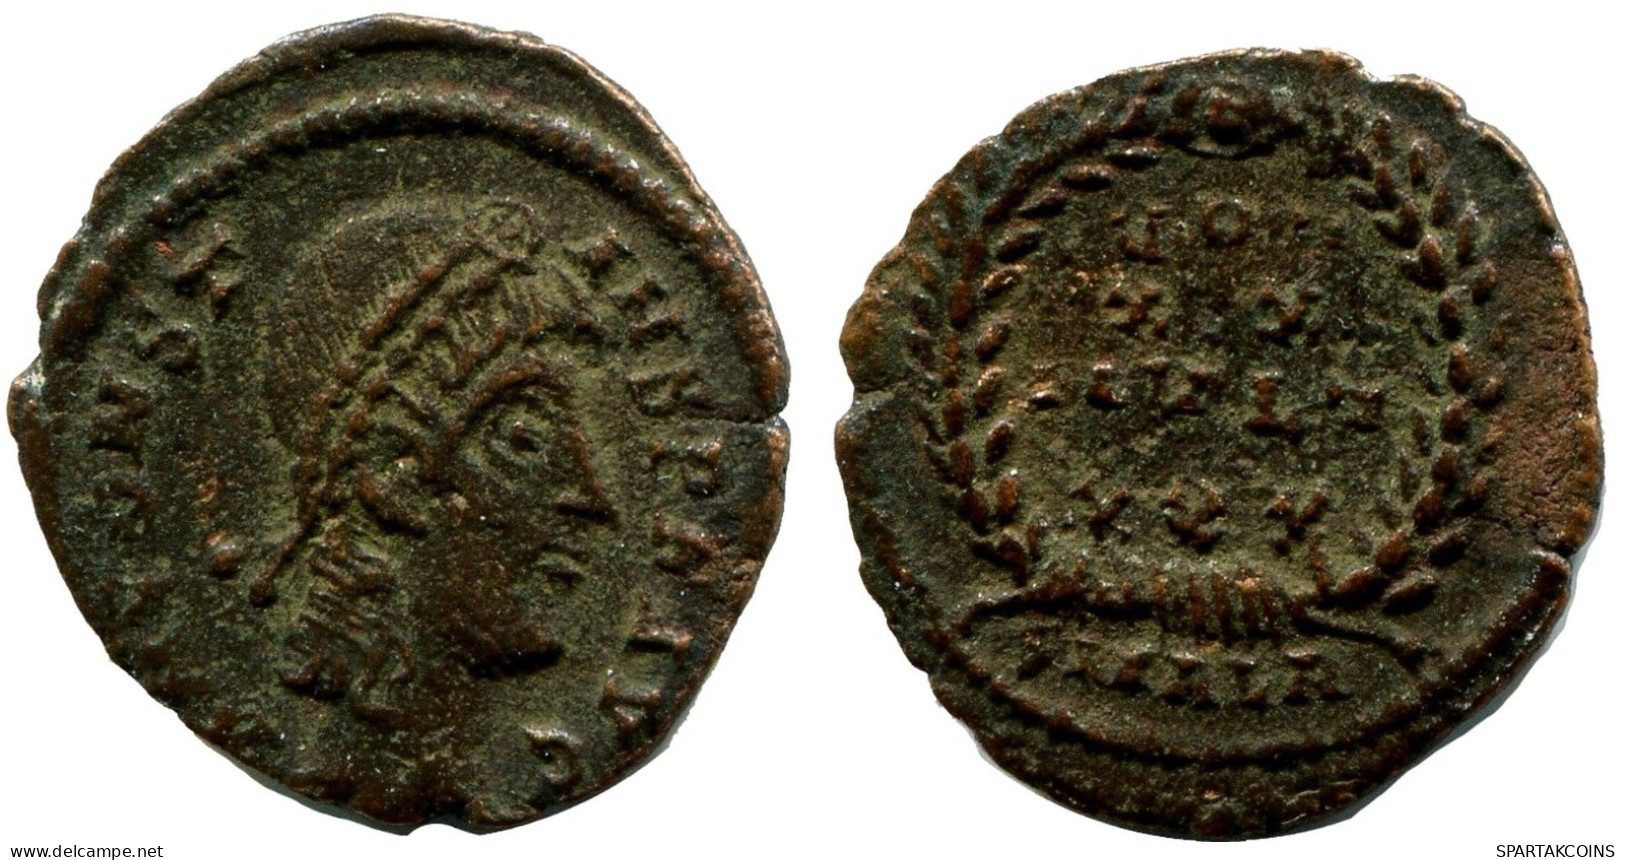 CONSTANS MINTED IN ALEKSANDRIA FROM THE ROYAL ONTARIO MUSEUM #ANC11465.14.U.A - Der Christlischen Kaiser (307 / 363)